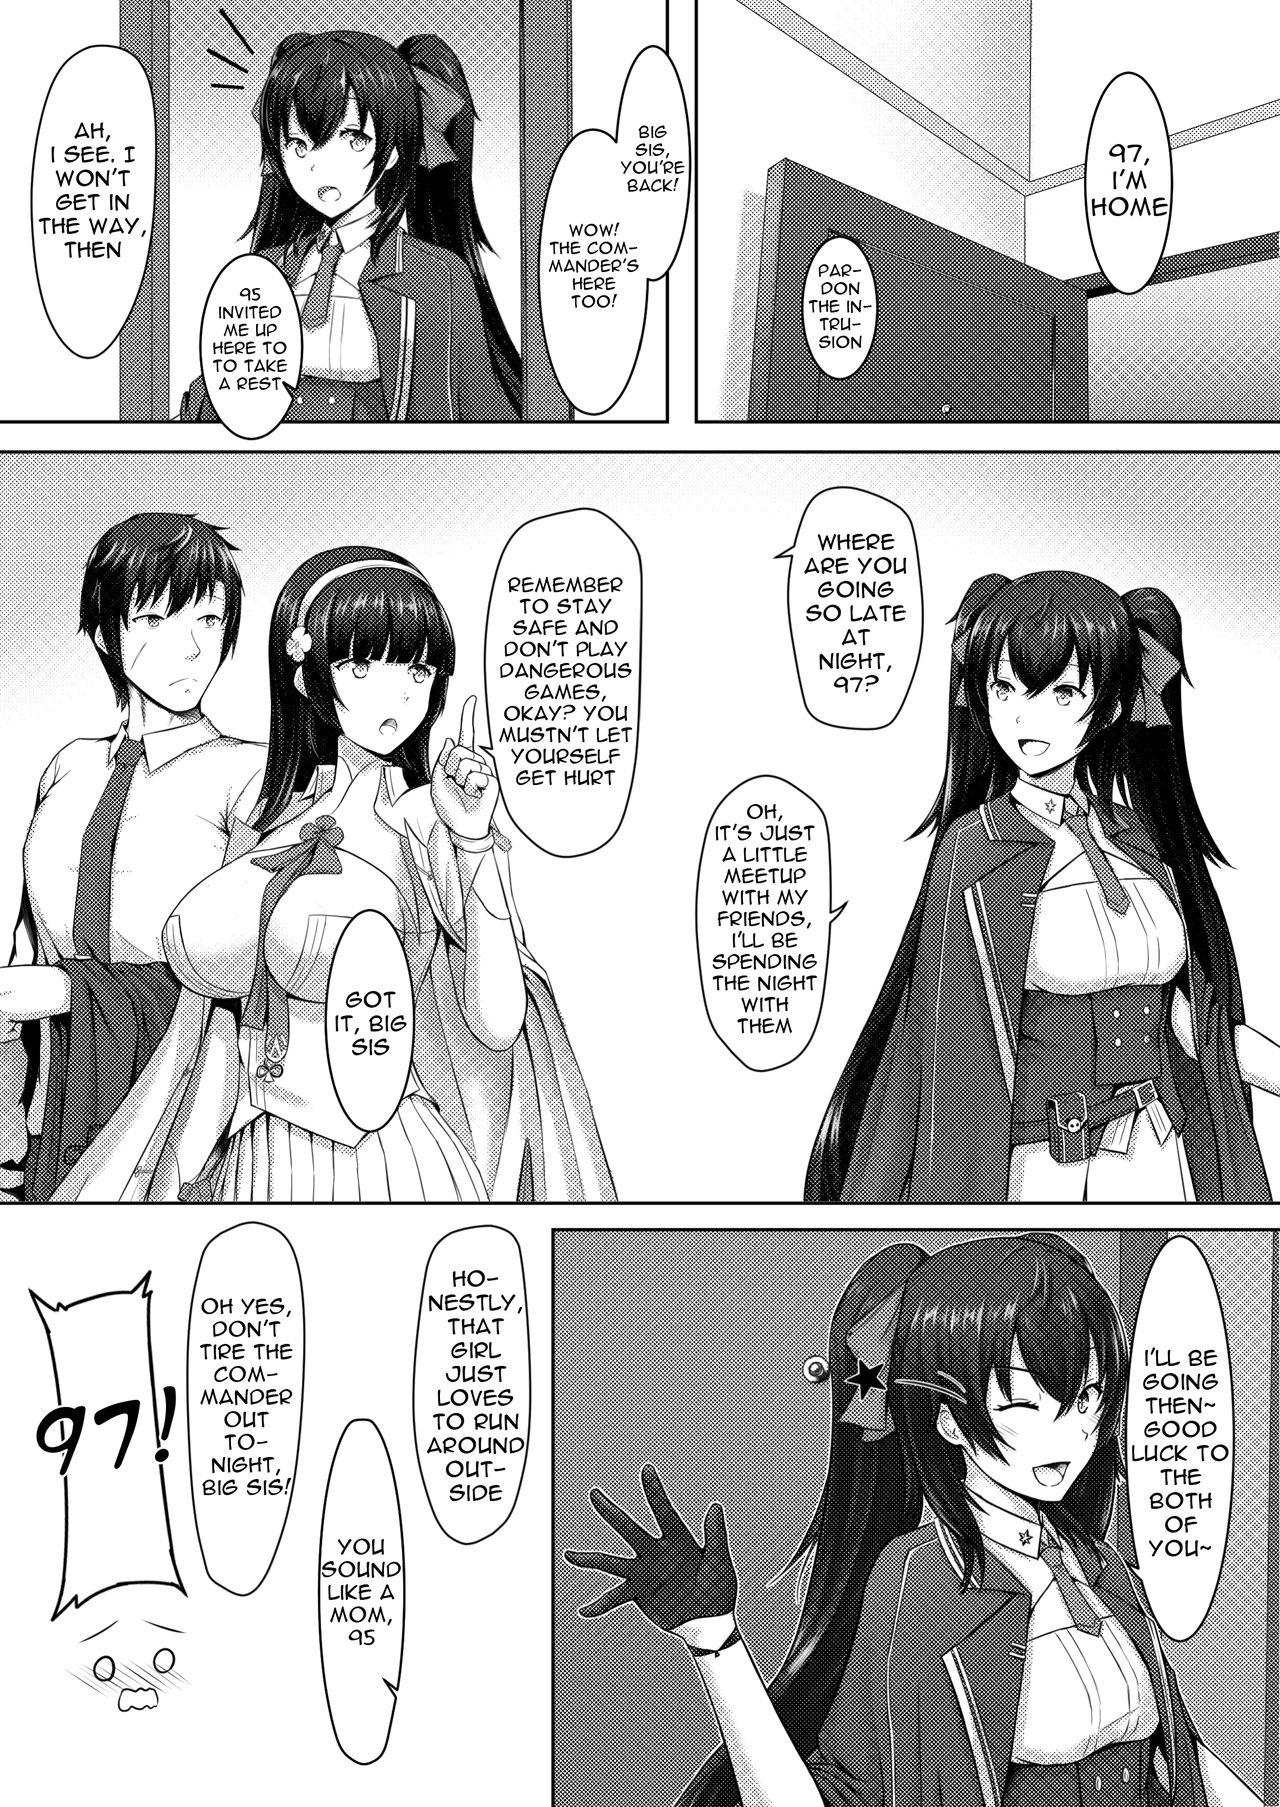 Sofa A Lovely Flower's Gift - Girls frontline Trannies - Page 4